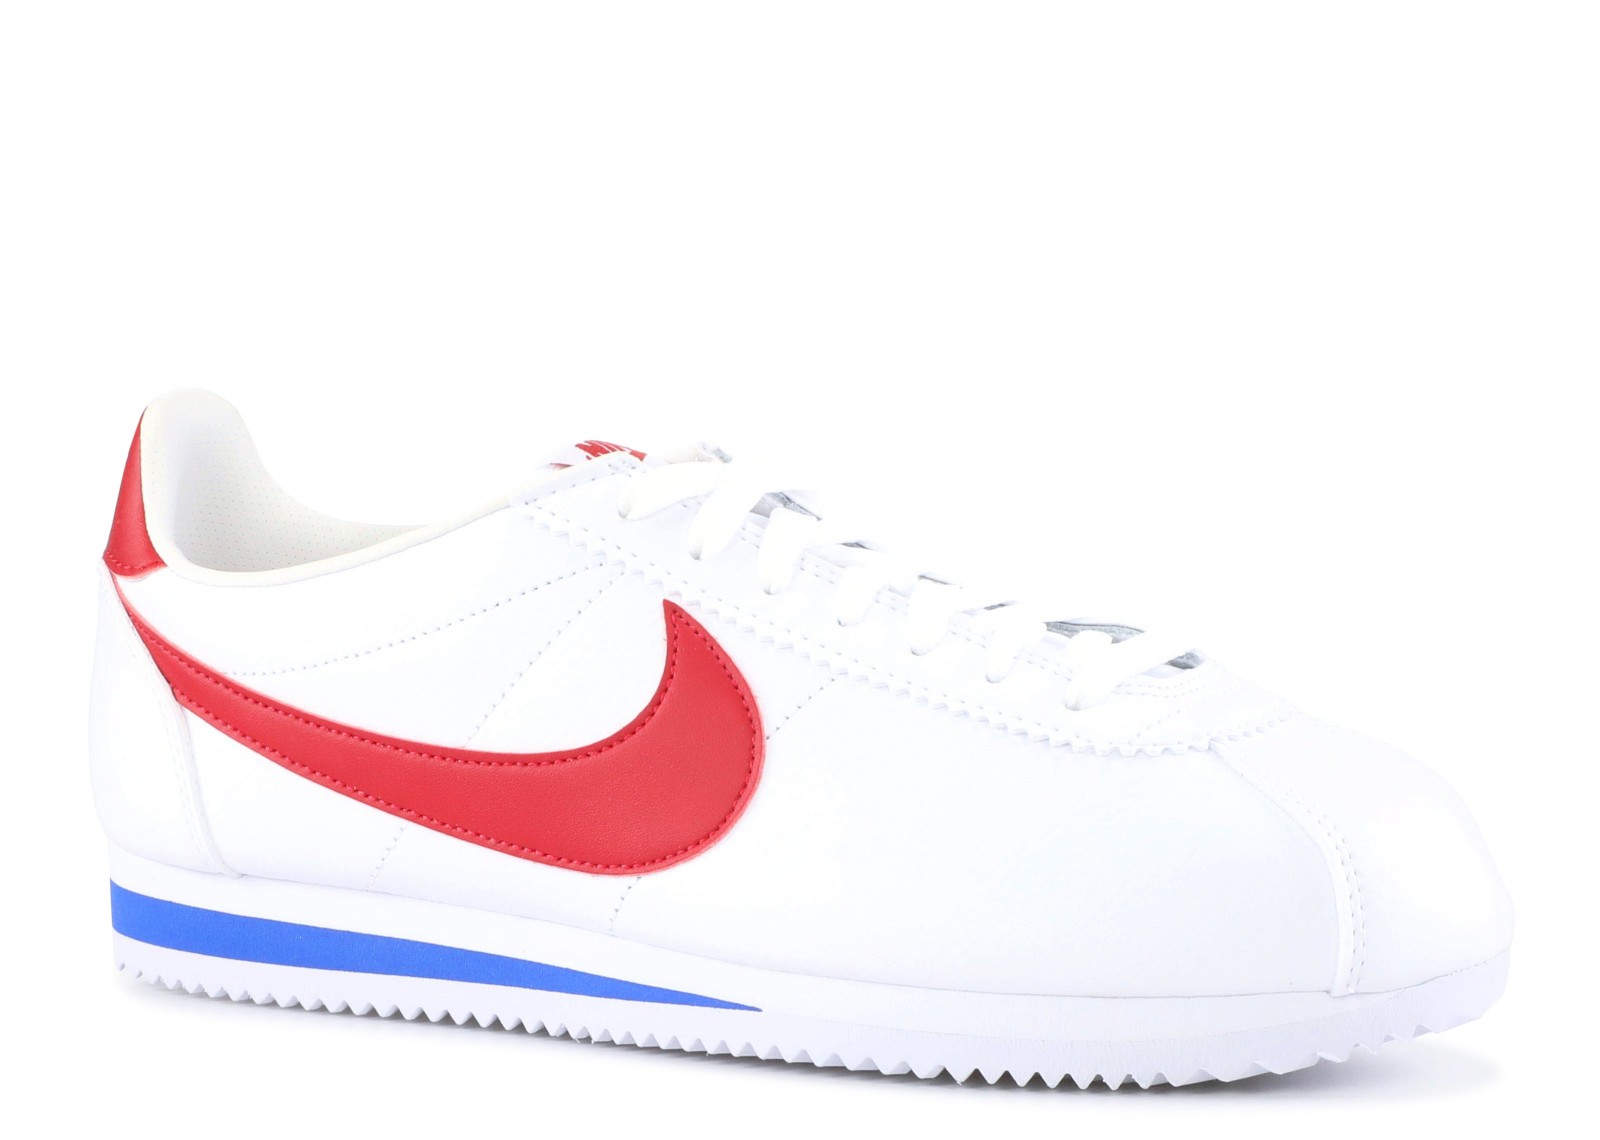 GmarShops 154 - kyrie ep animal oracle aqua cheetah - Nike Classic Cortez Leather White Red Blue 749571